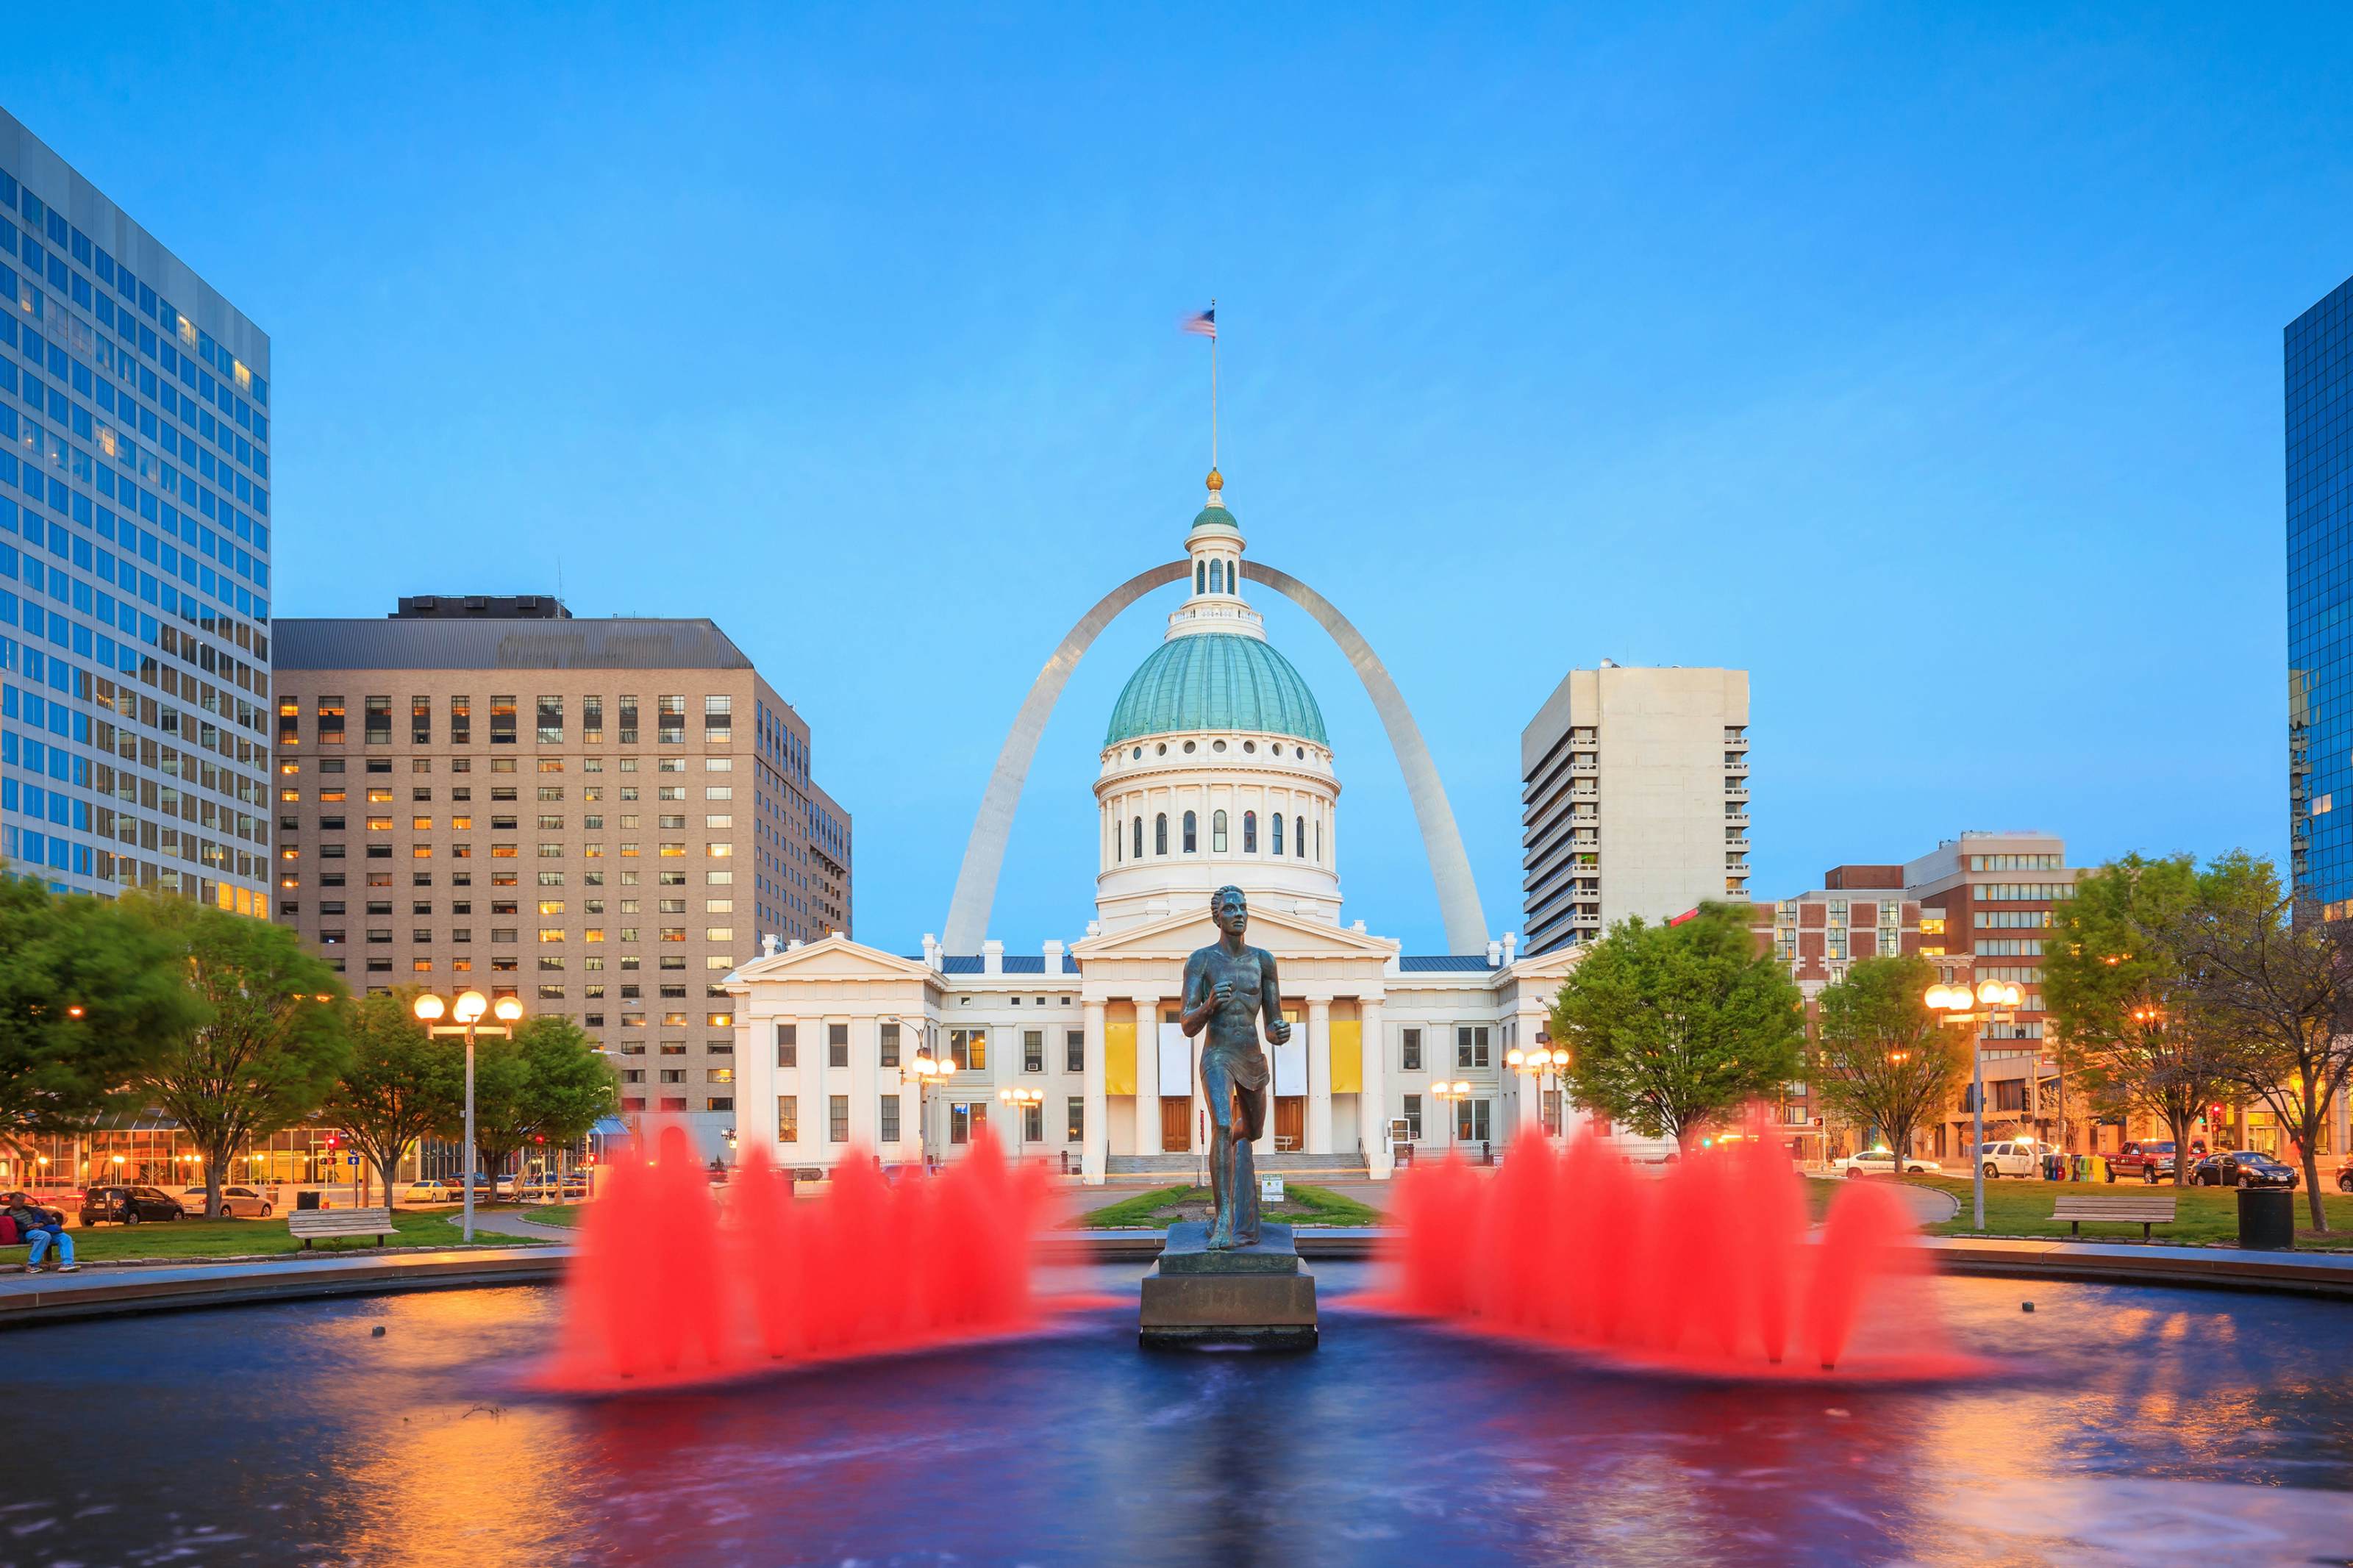 St Louis travel - Lonely Planet